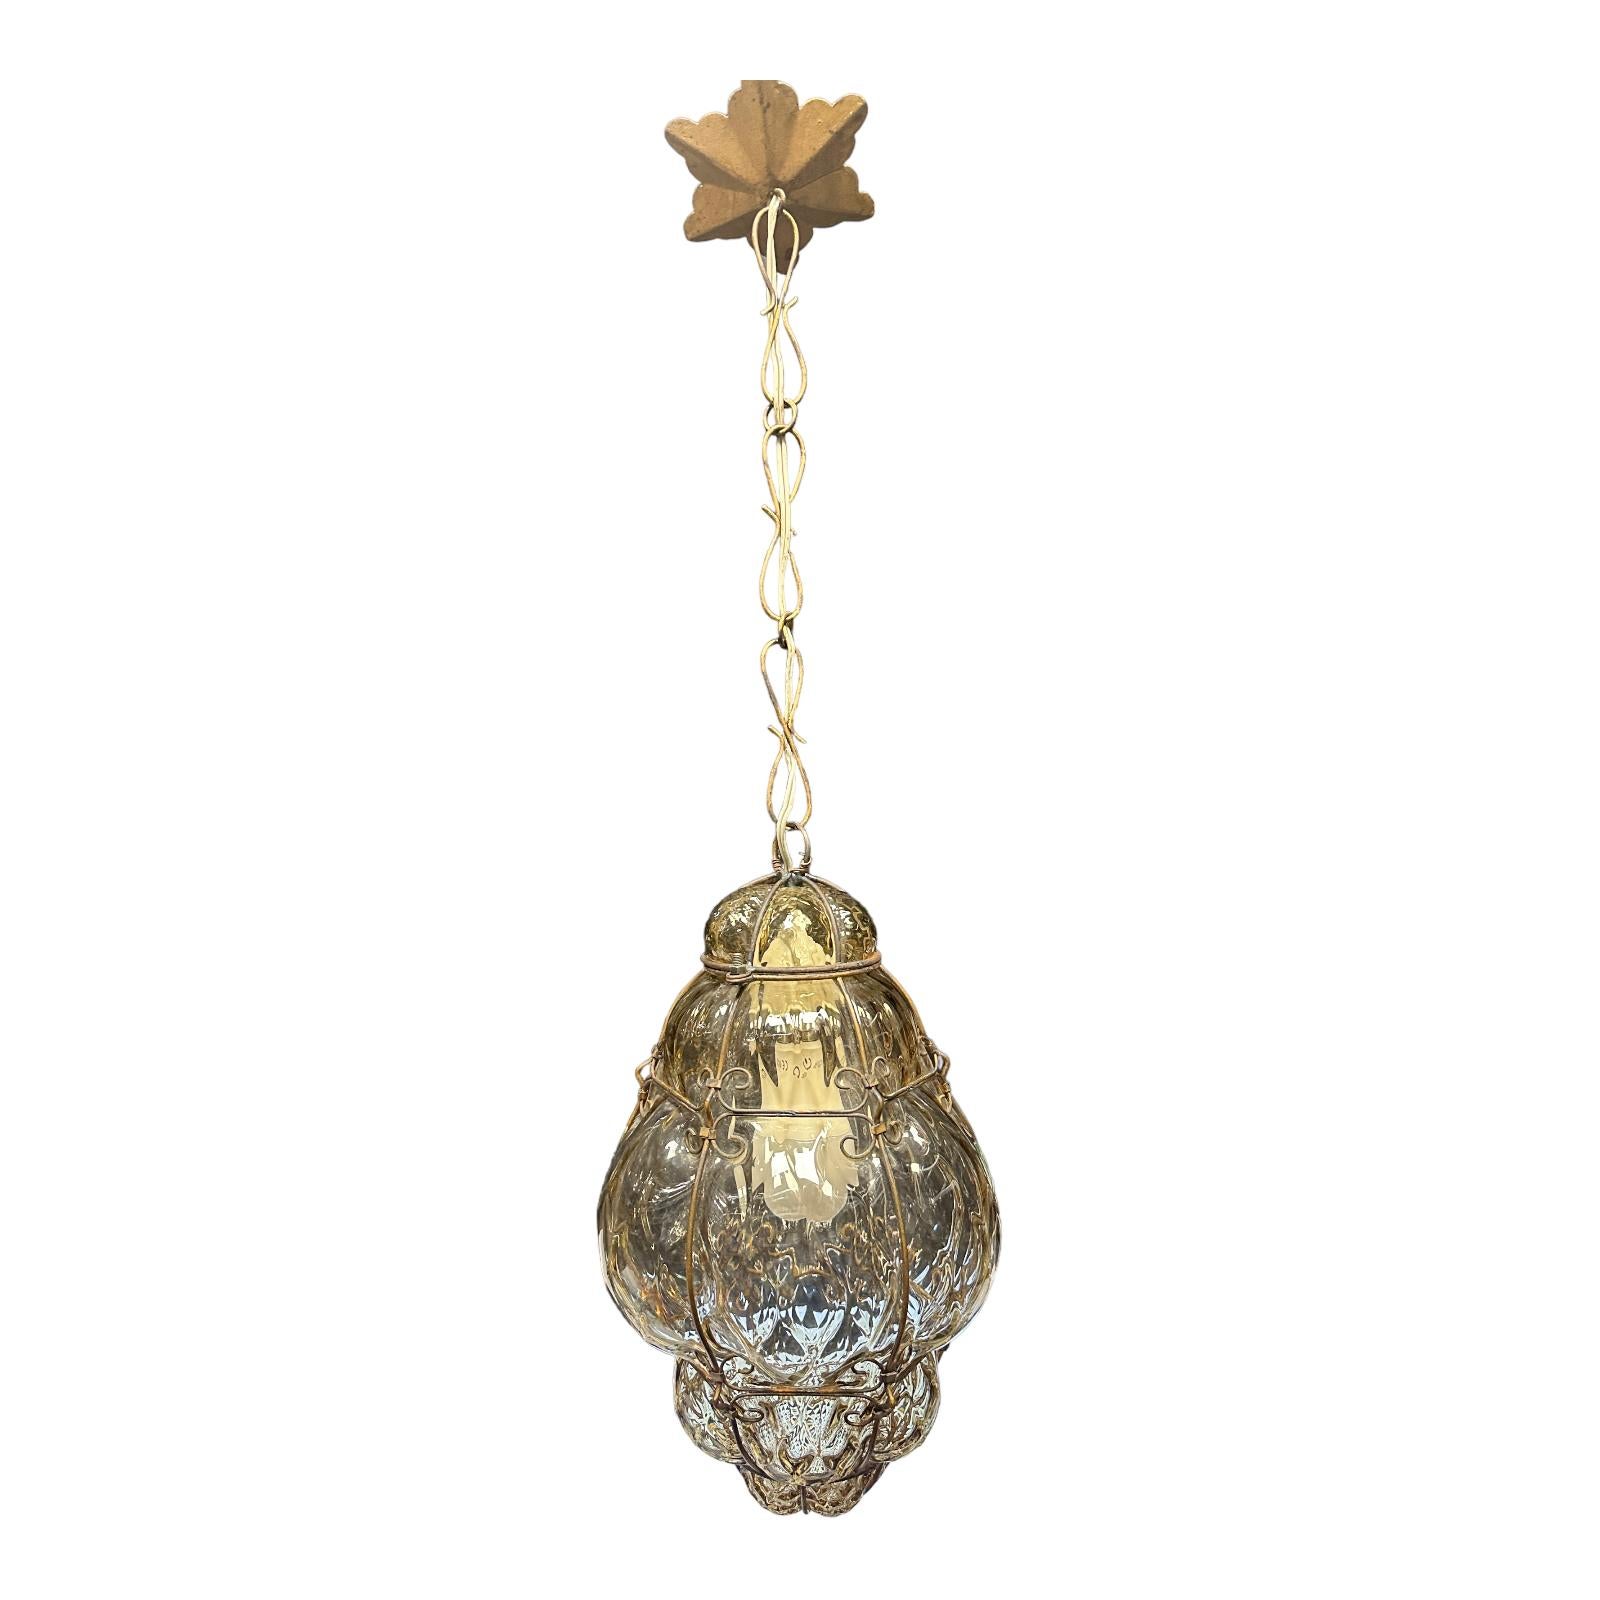 Pair of Petite Murano Caged Glass Pendant Light, 1930s Italy vintage For Sale 7